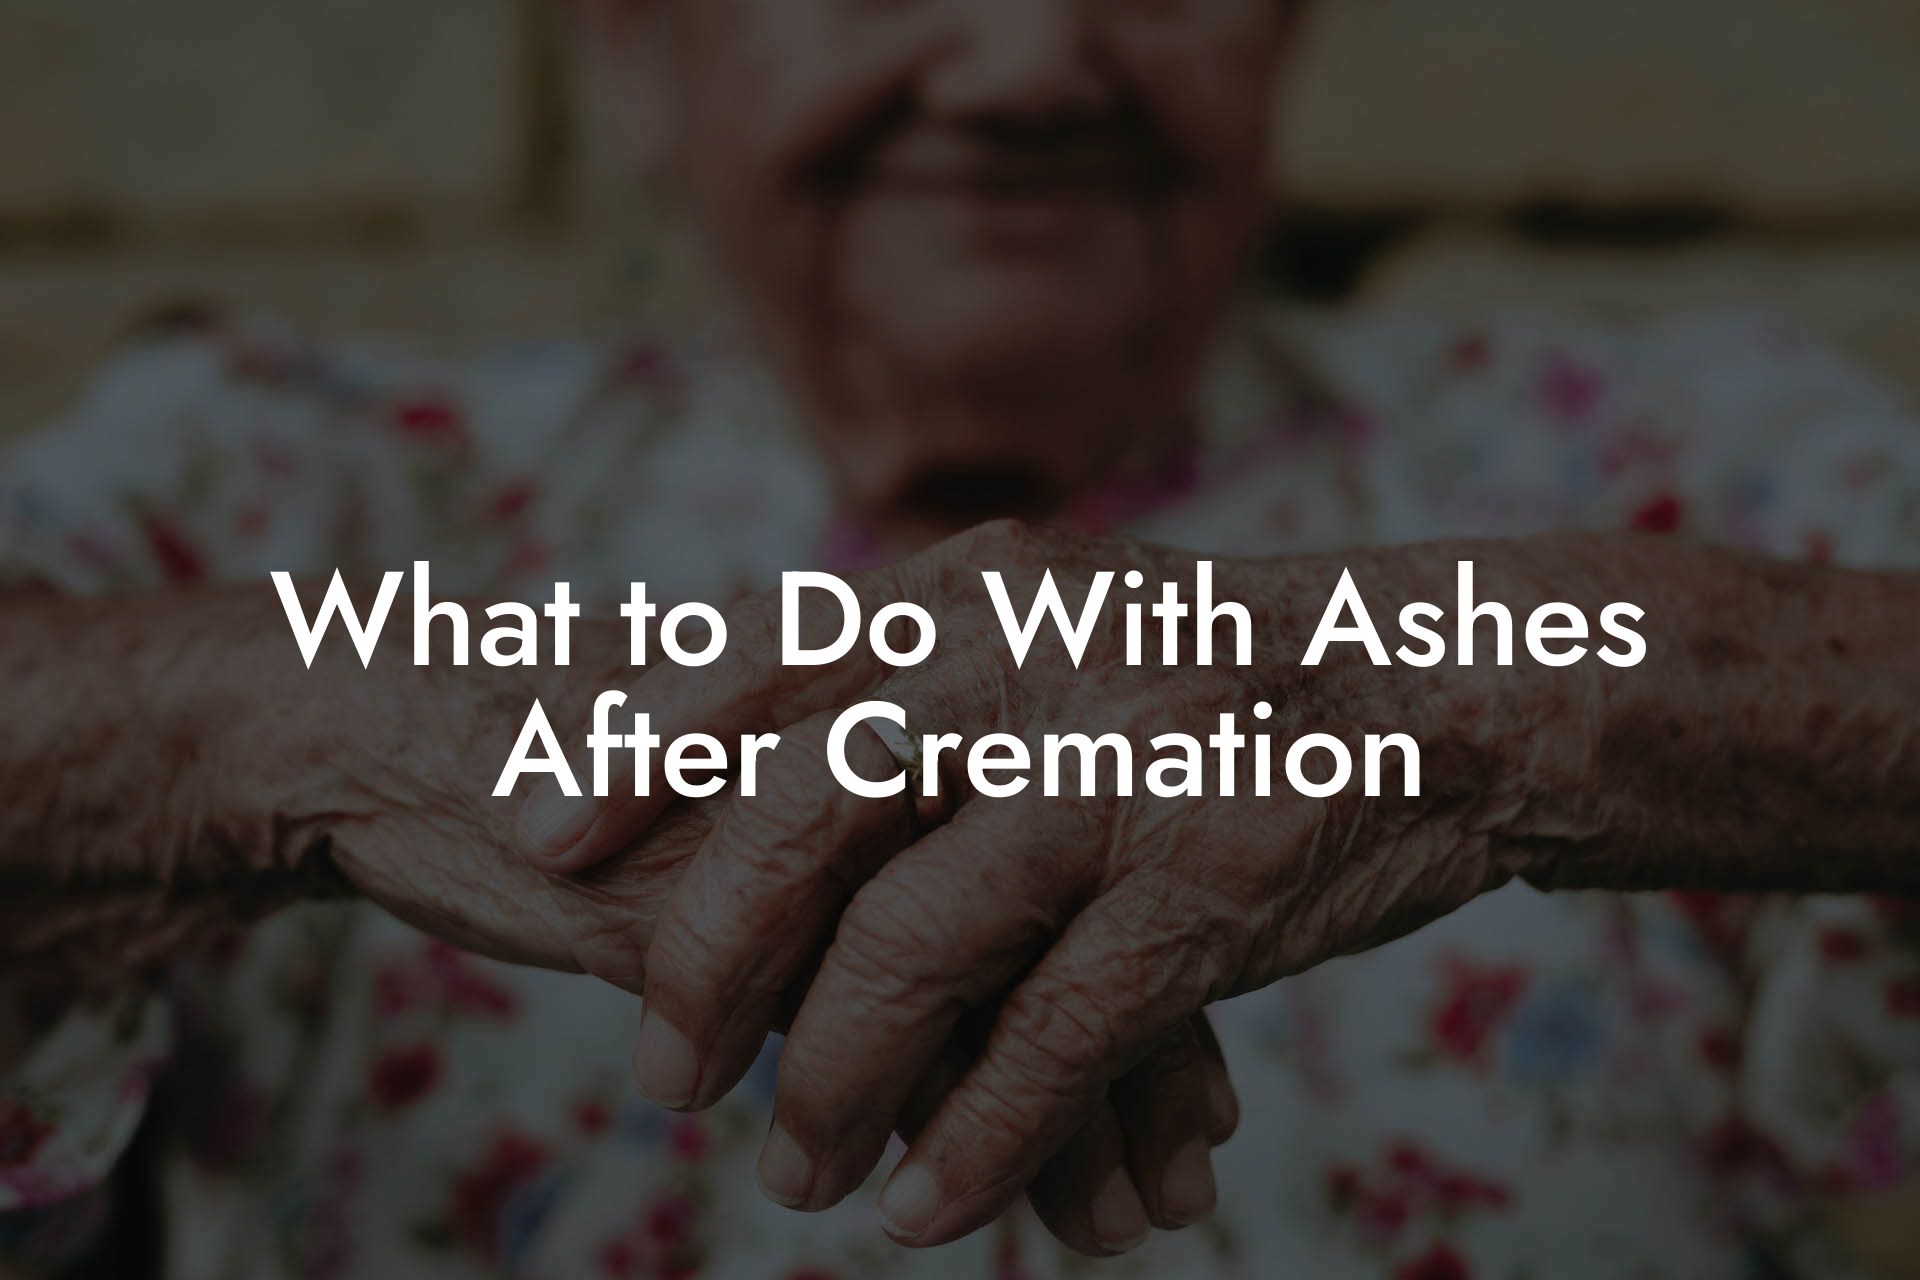 What to Do With Ashes After Cremation